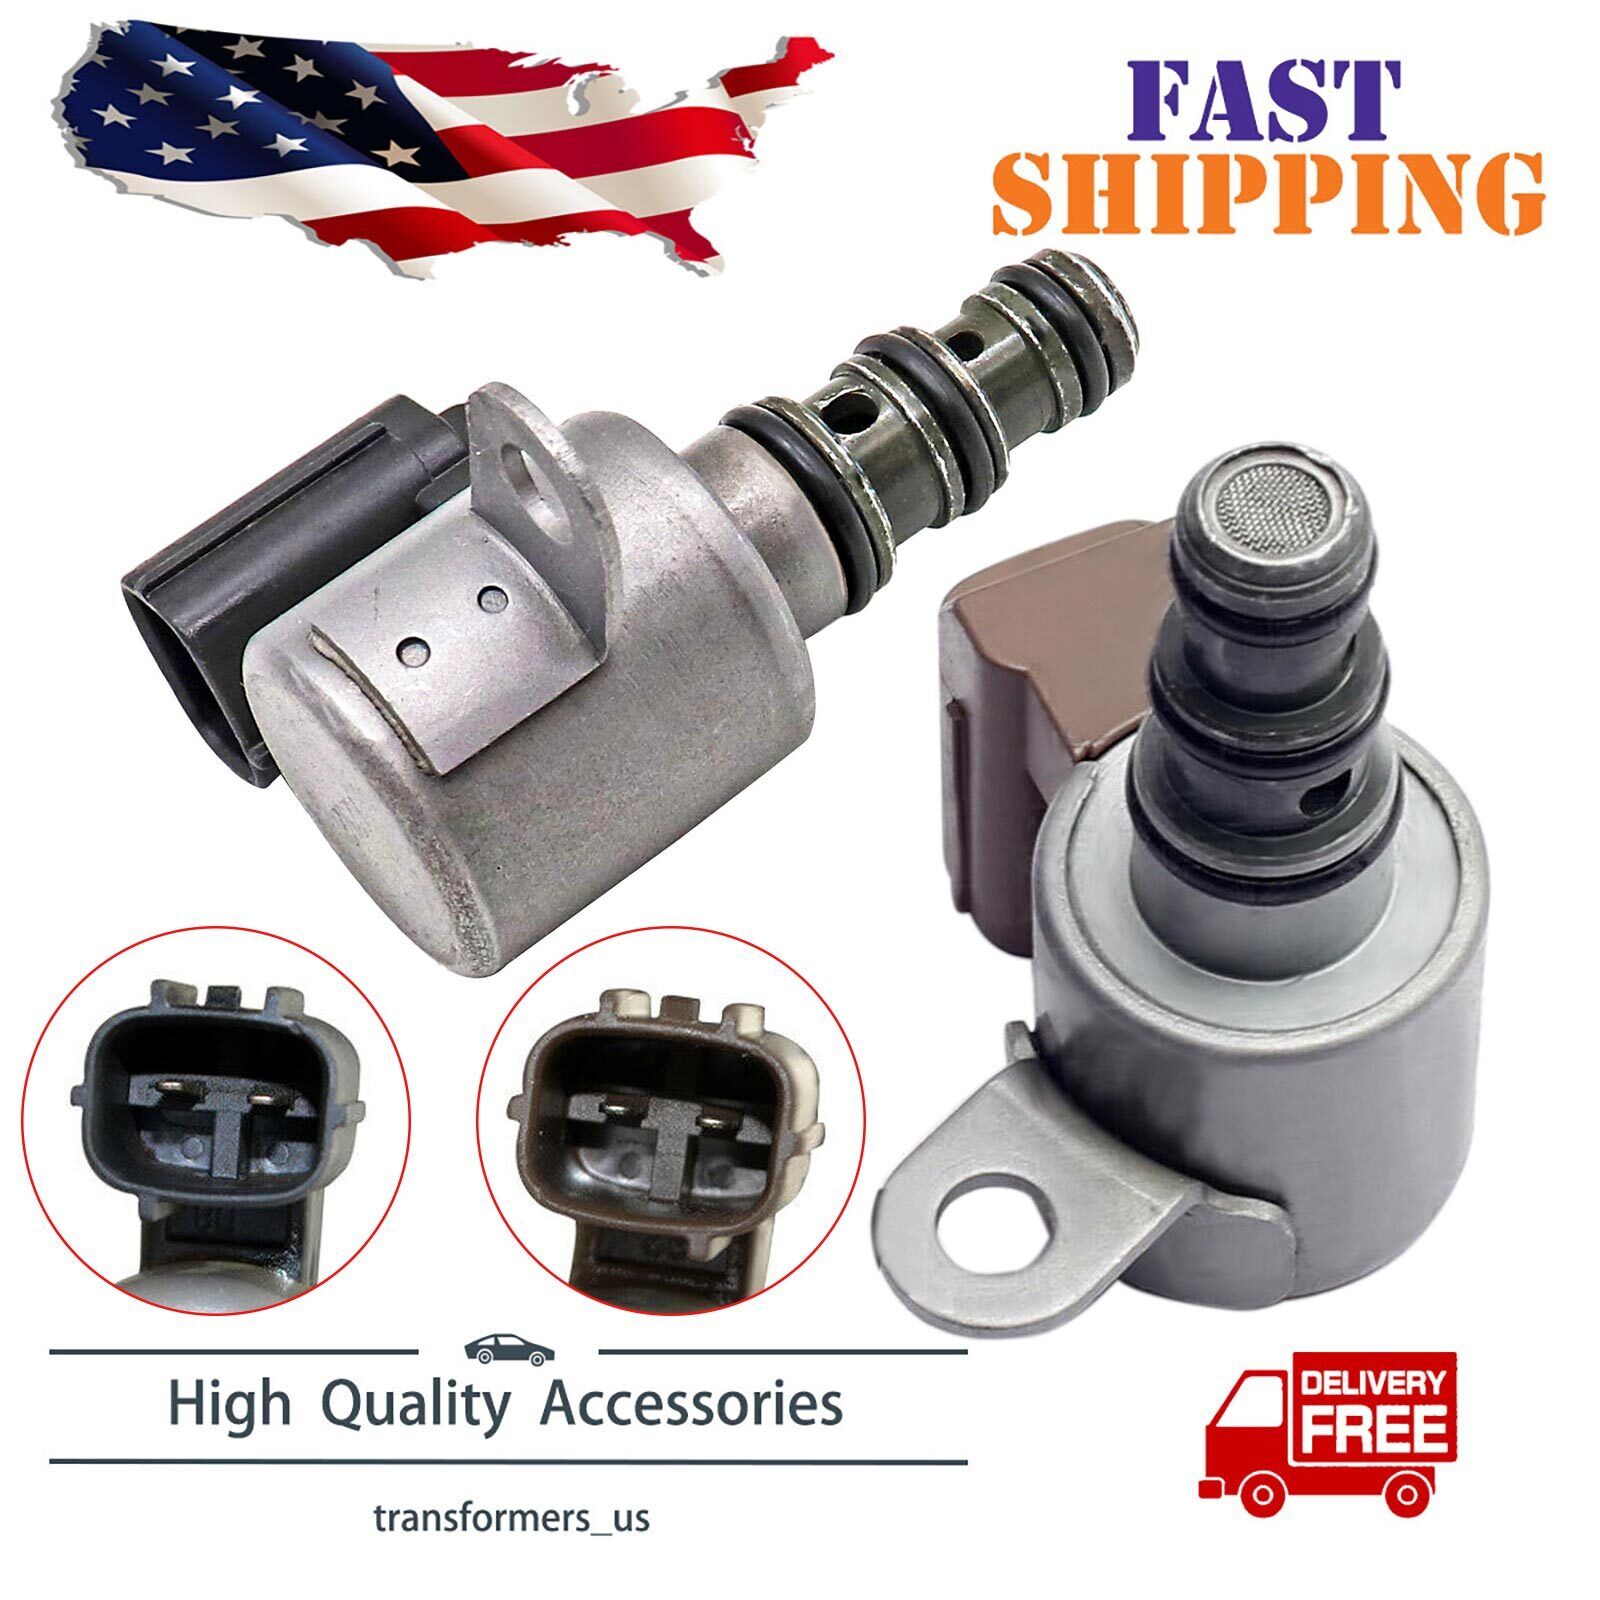 Transmission Control Solenoid Valve For Honda Accord Odyssey Pilot Acura TL CL